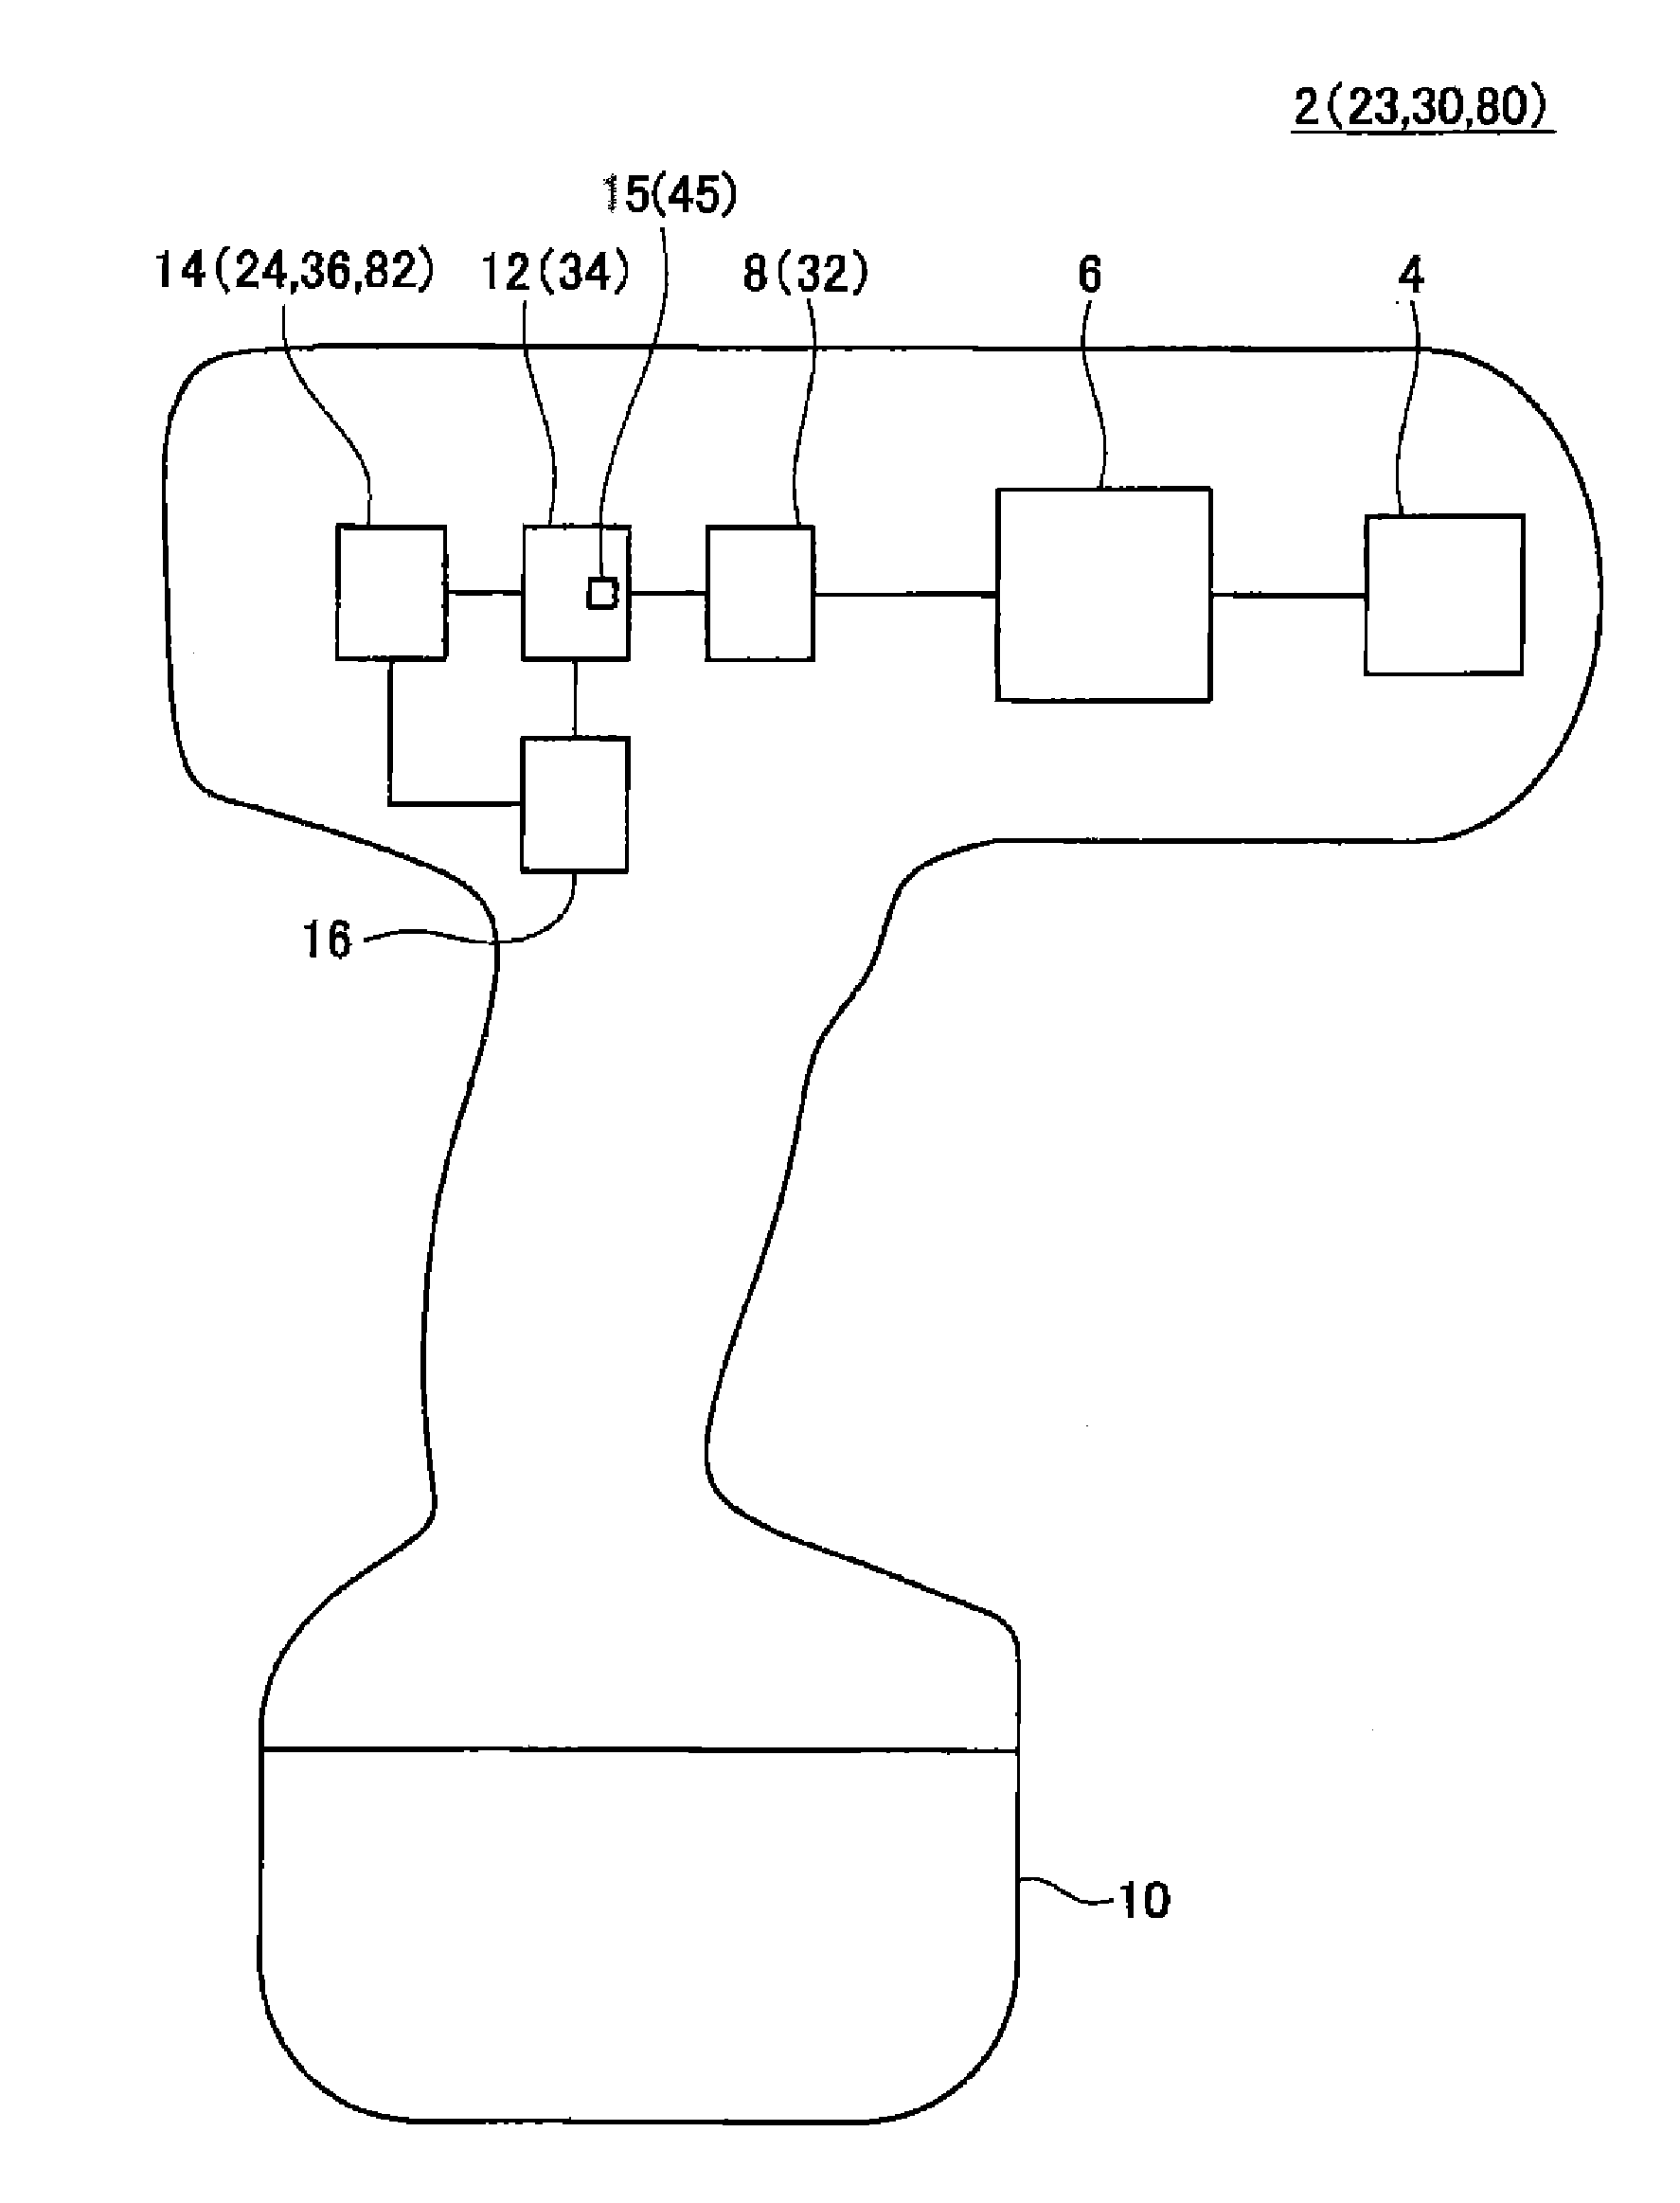 Apparatus for estimating quantity of state relating to motor, and electric tool